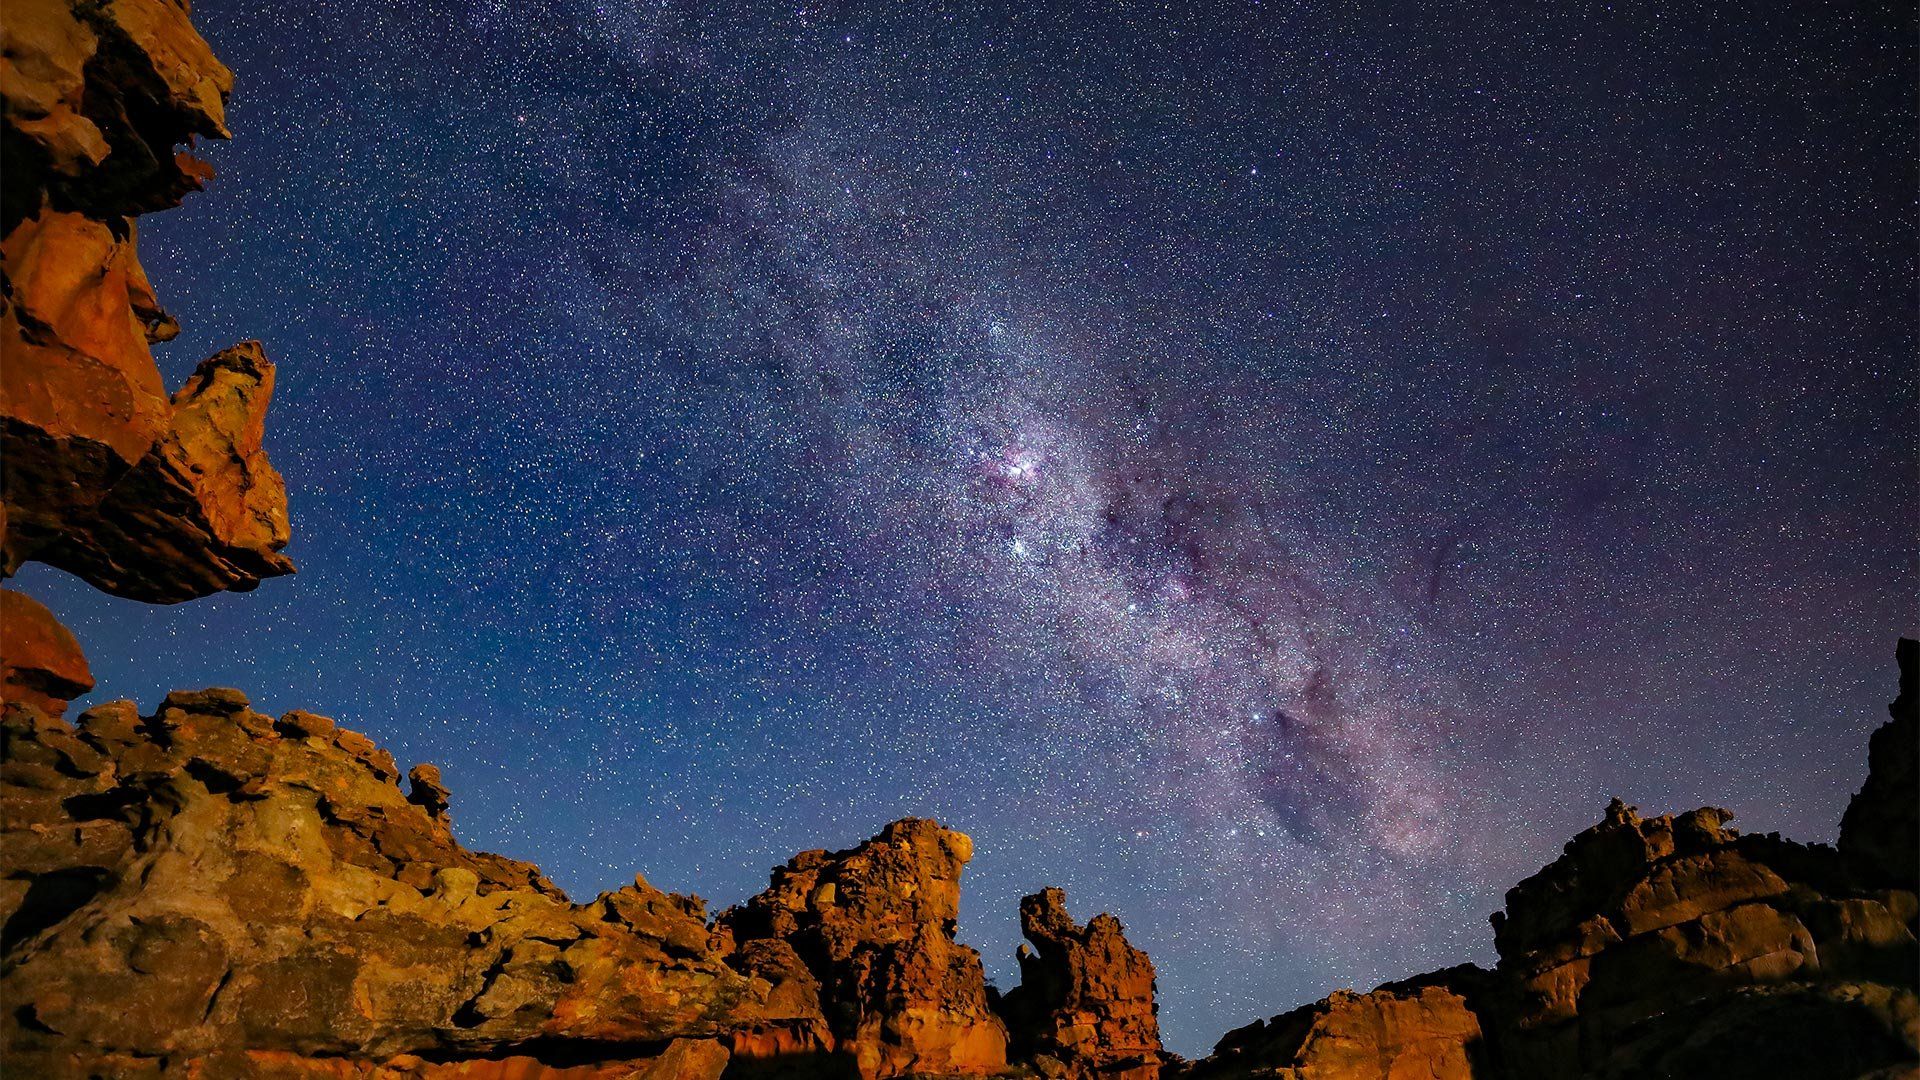 The Milky Way in a star-filled sky, above rugged cliffs in the foreground.